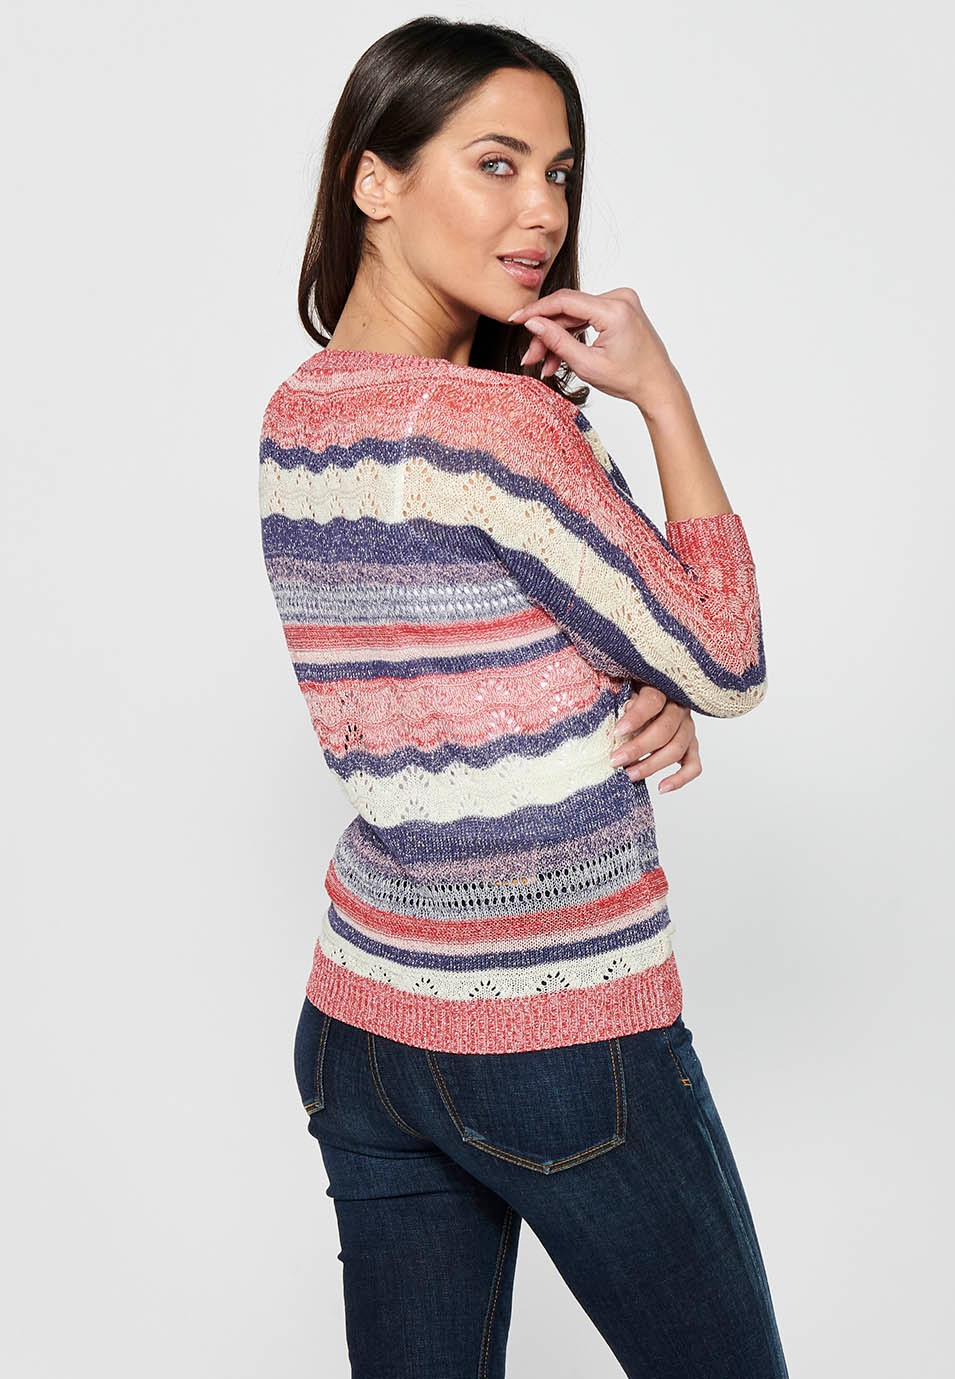 Medium sleeve sweater with V-neck. Multicolor Striped Openwork Tricot for Women 5